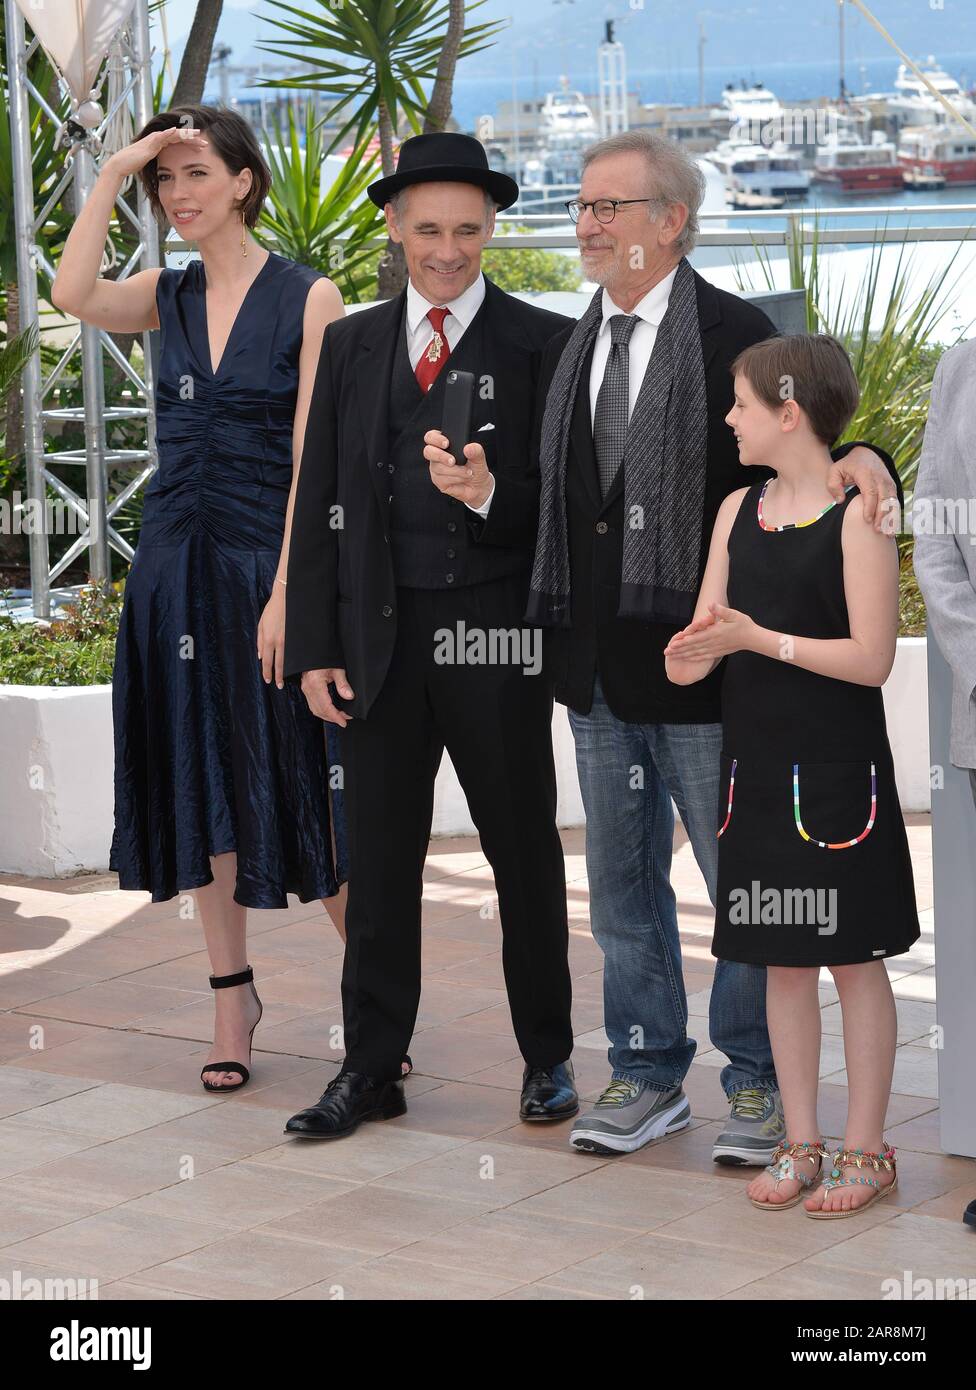 CANNES, FRANCE - MAY 14, 2016: Actors Rebecca Hall, Mark Rylance,Ruby Barnhill & director Steven Spielberg at the photocallThe BFG' at the 69th Festival de Cannes. Stock Photo